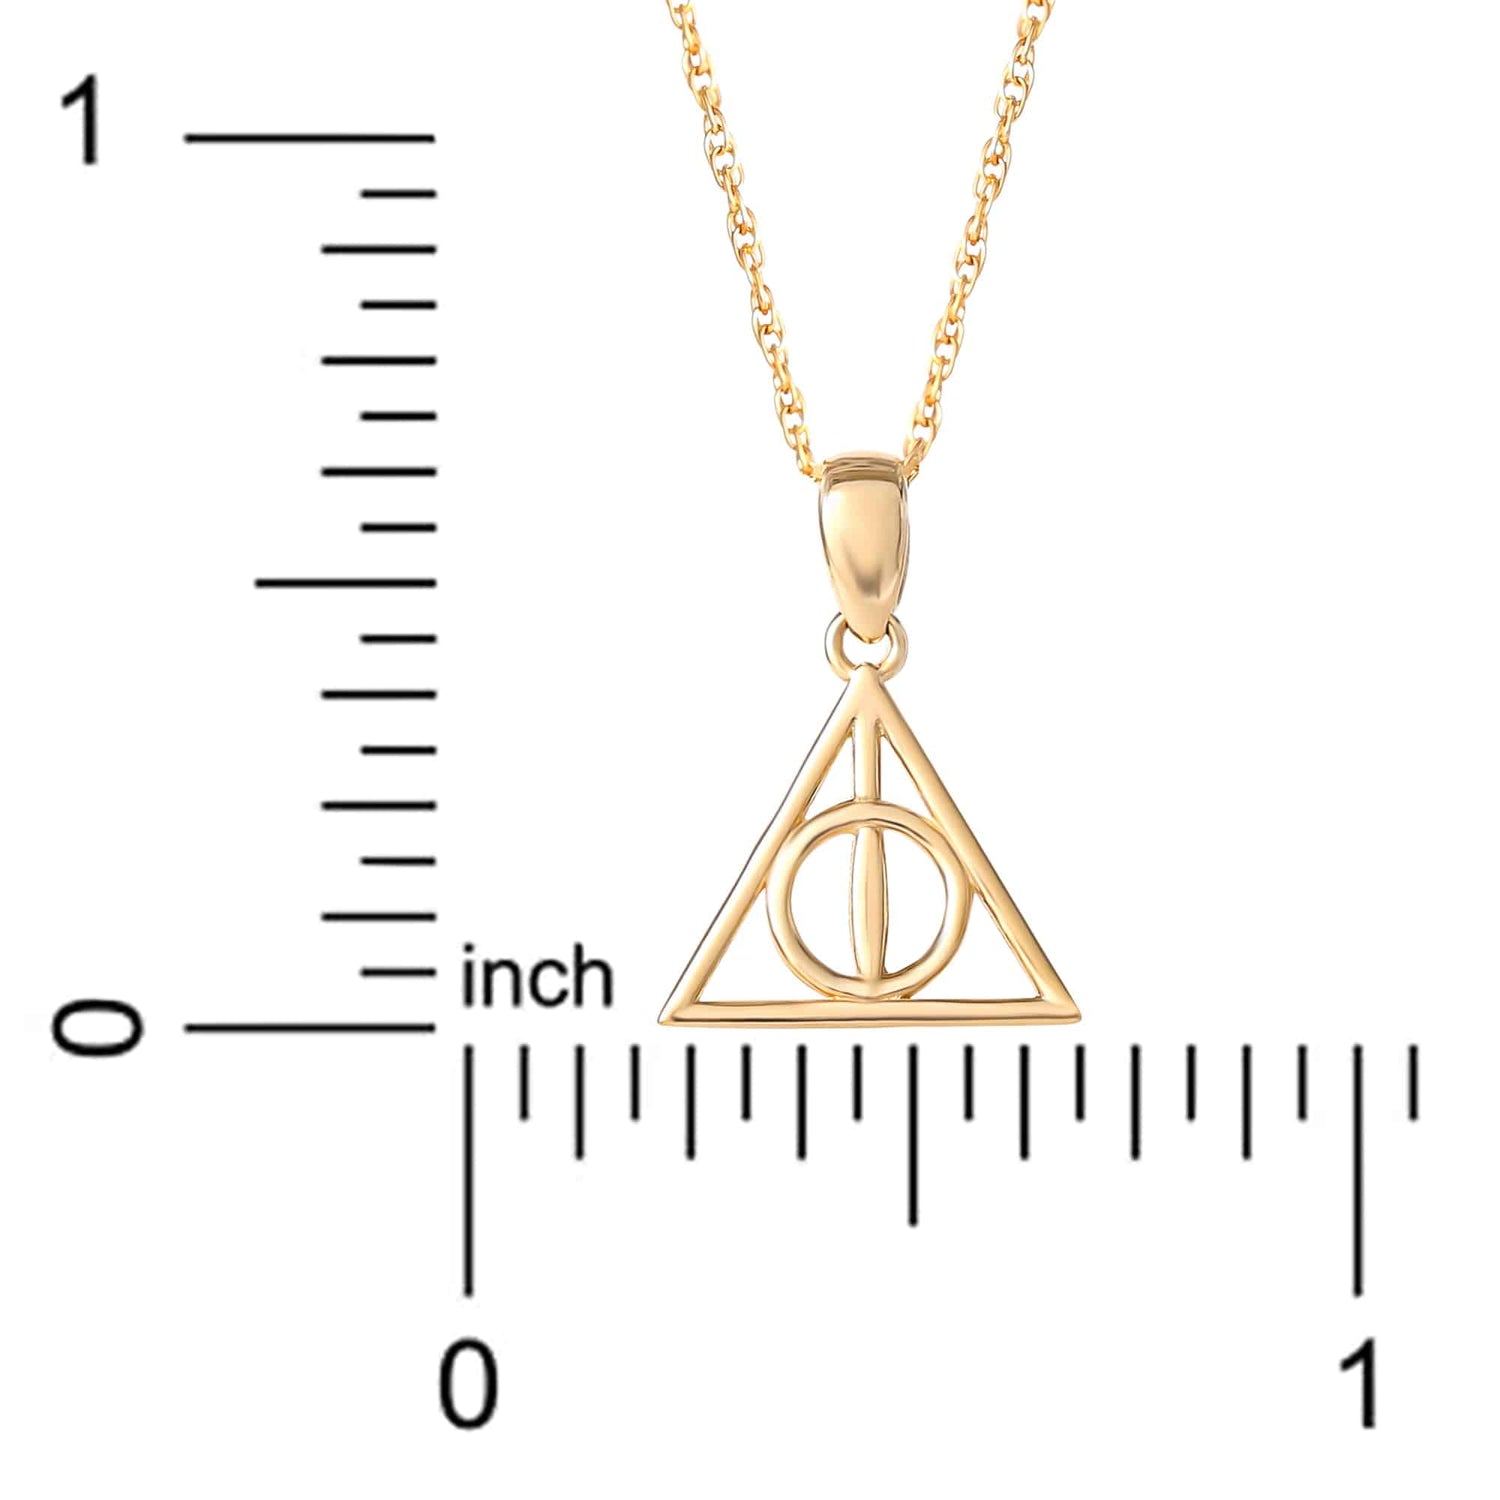 Harry Potter Jewellery and Gifts UK from House of Spells